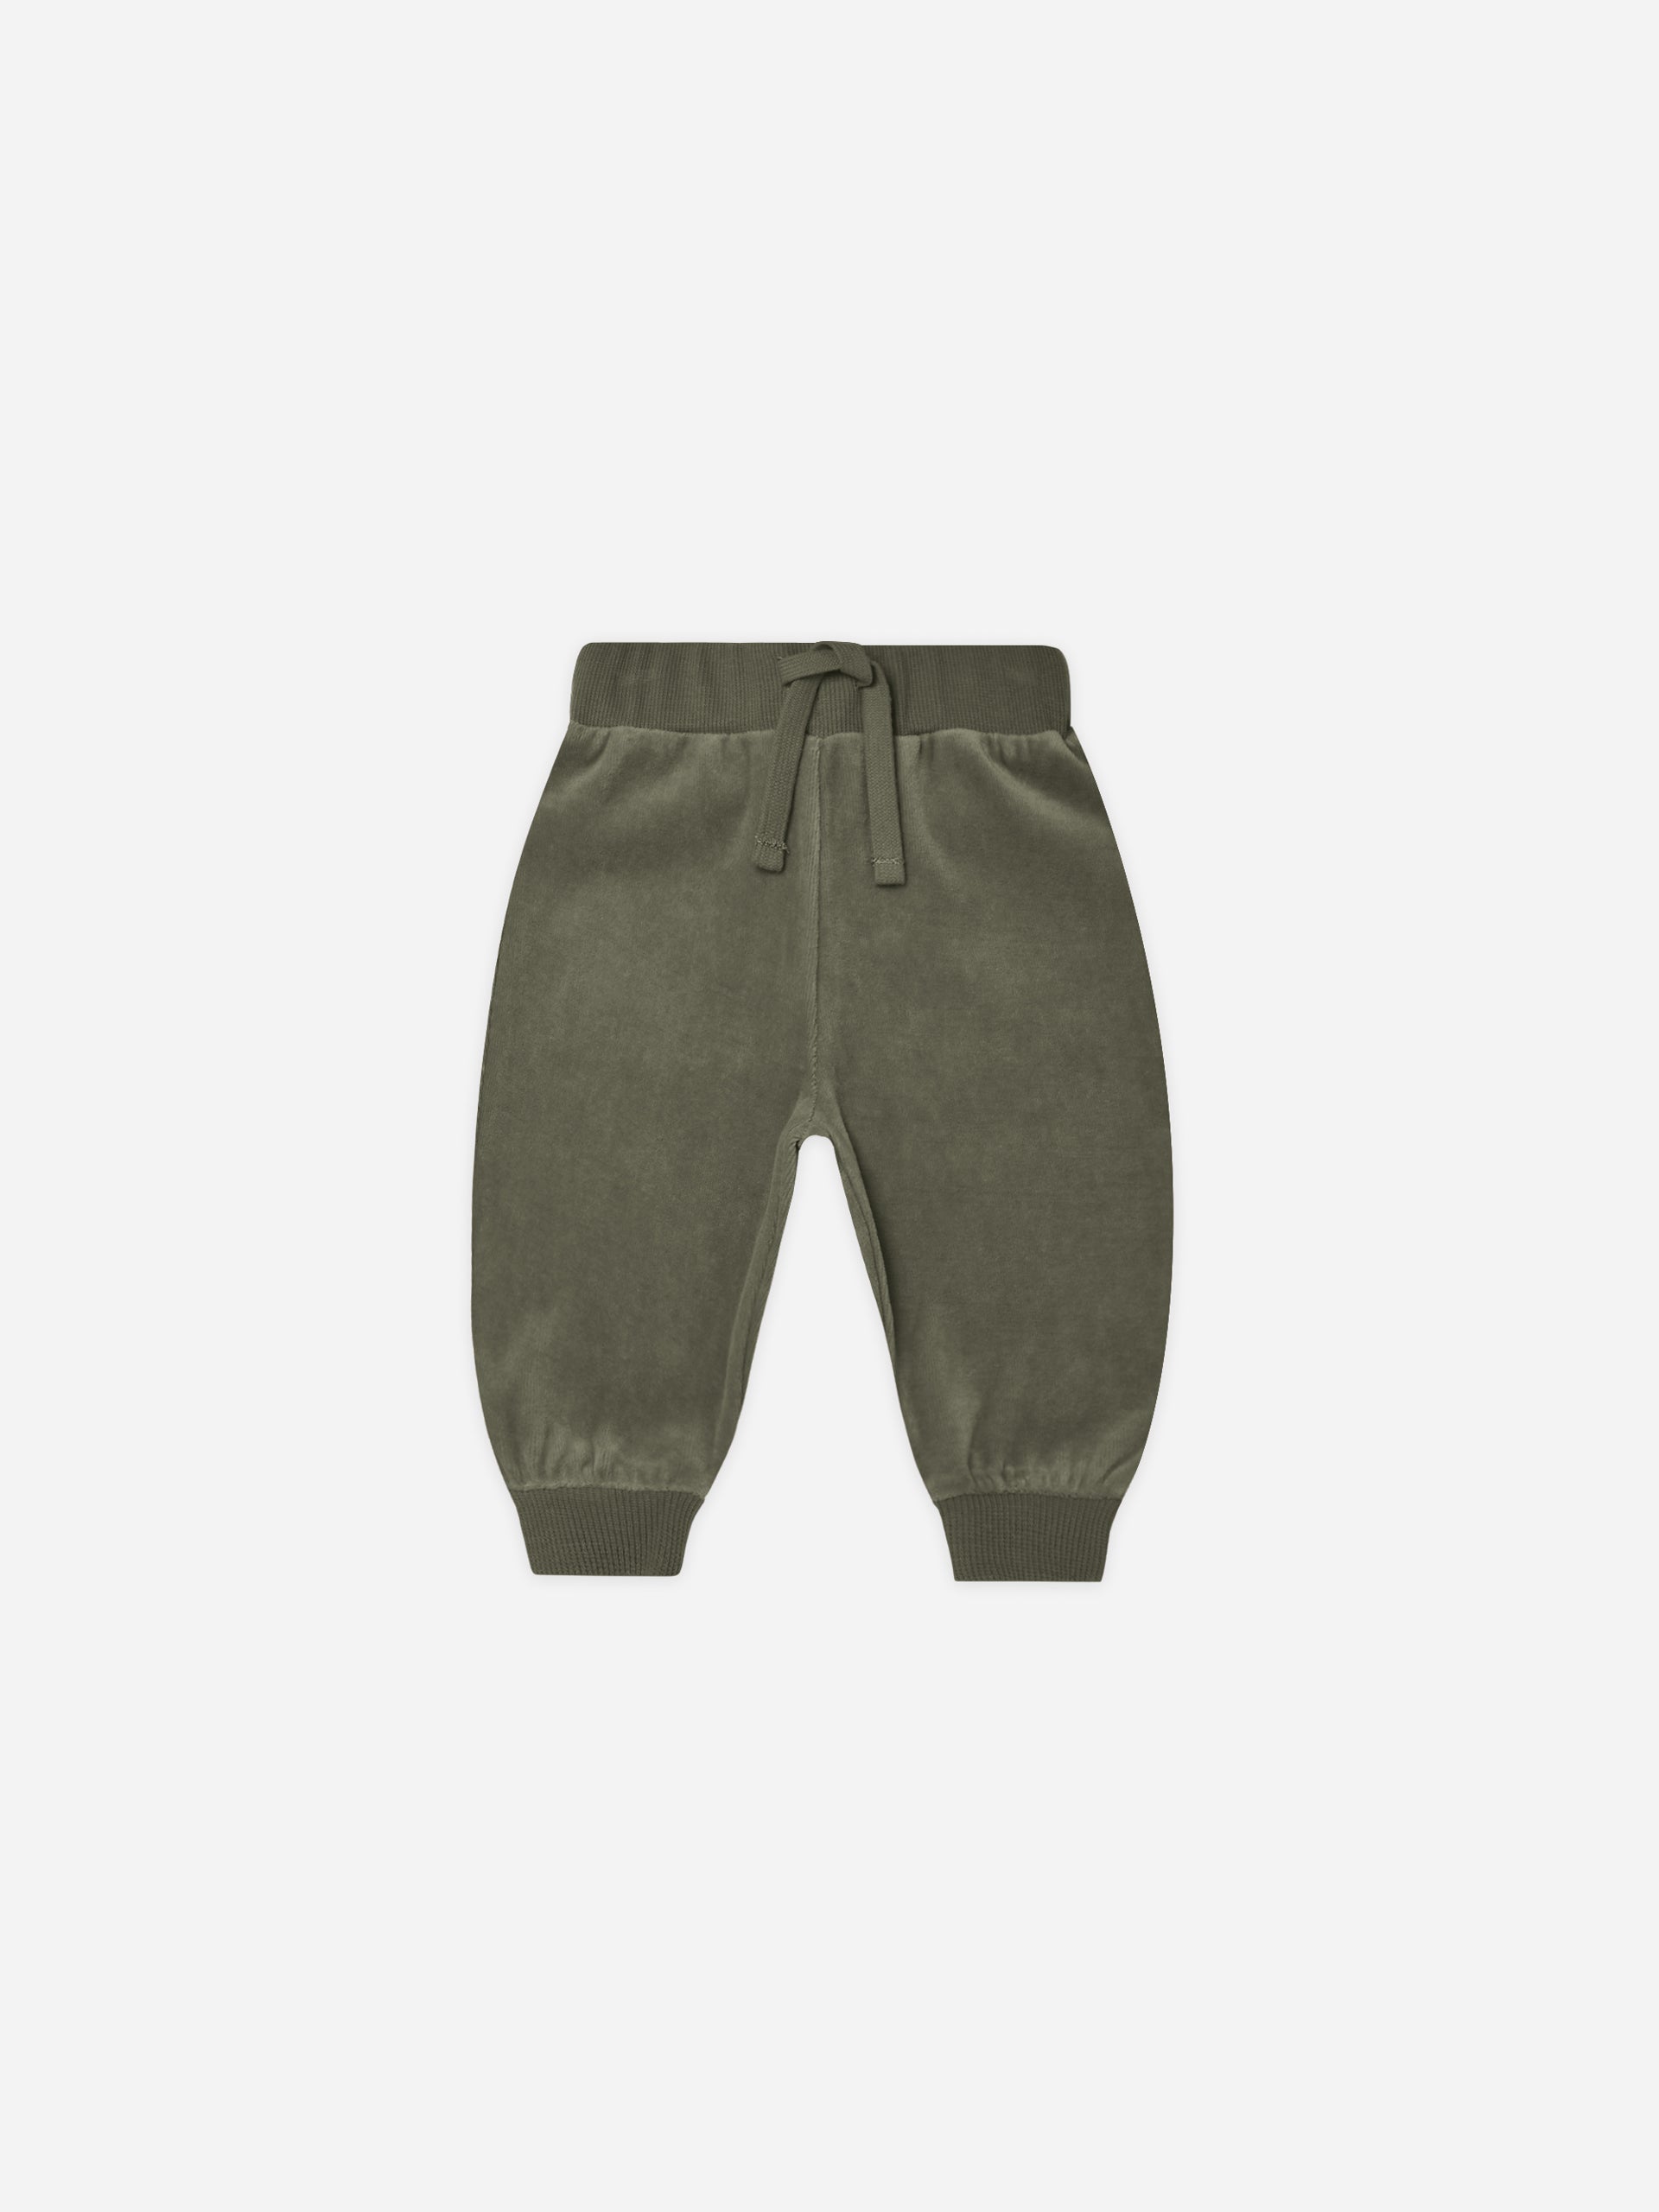 Velour Relaxed Sweatpant || Forest - Rylee + Cru | Kids Clothes | Trendy Baby Clothes | Modern Infant Outfits |